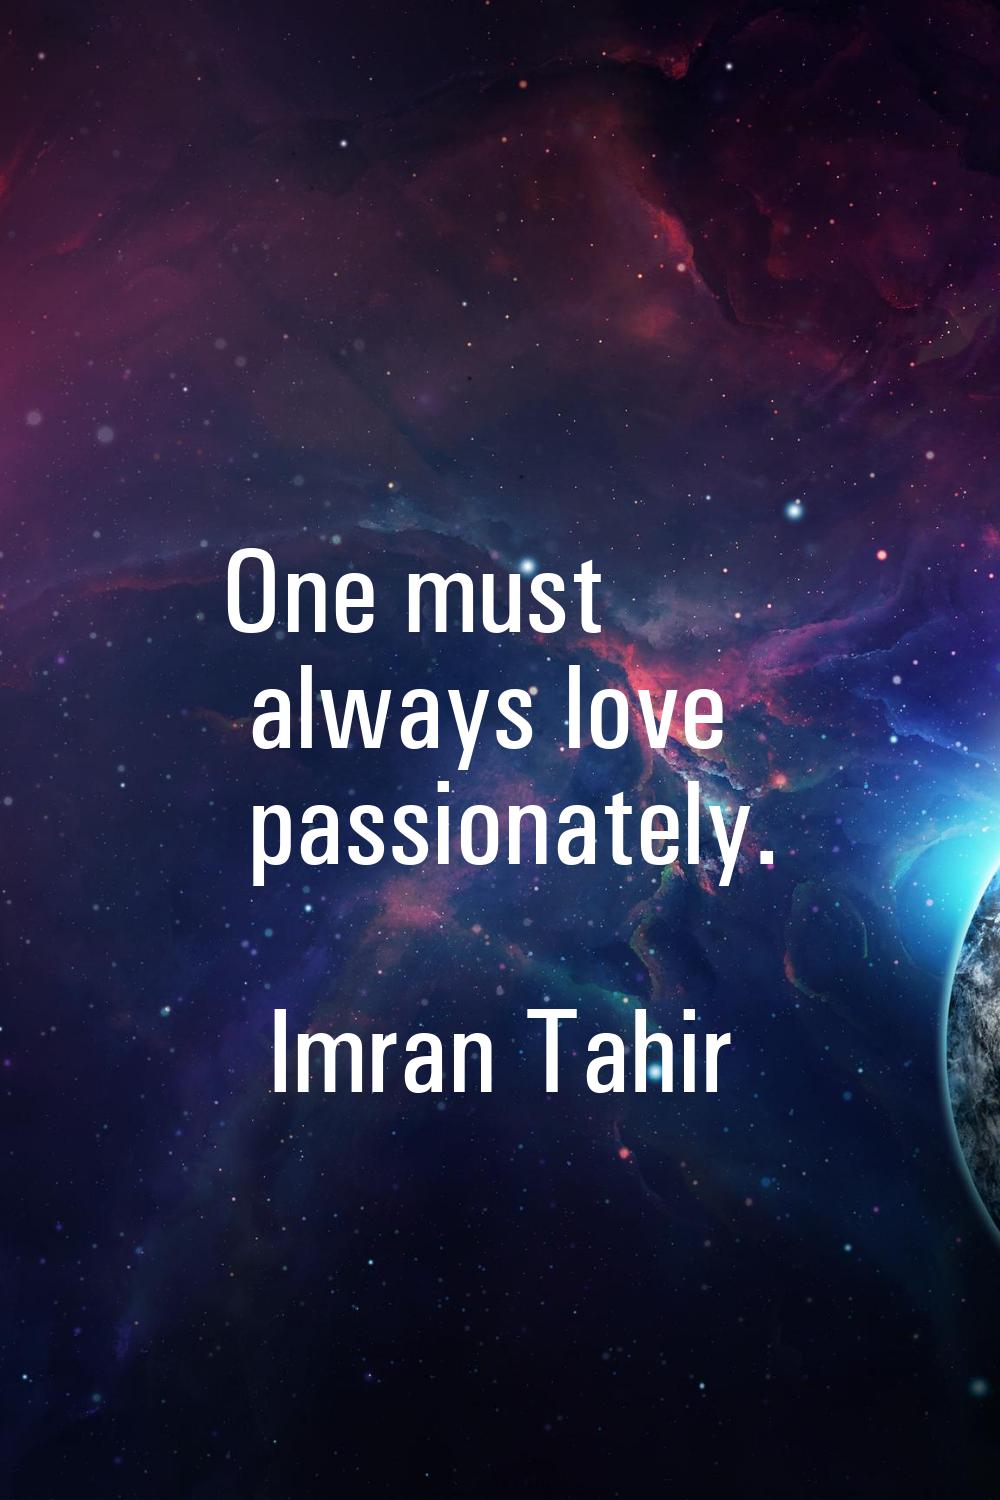 One must always love passionately.